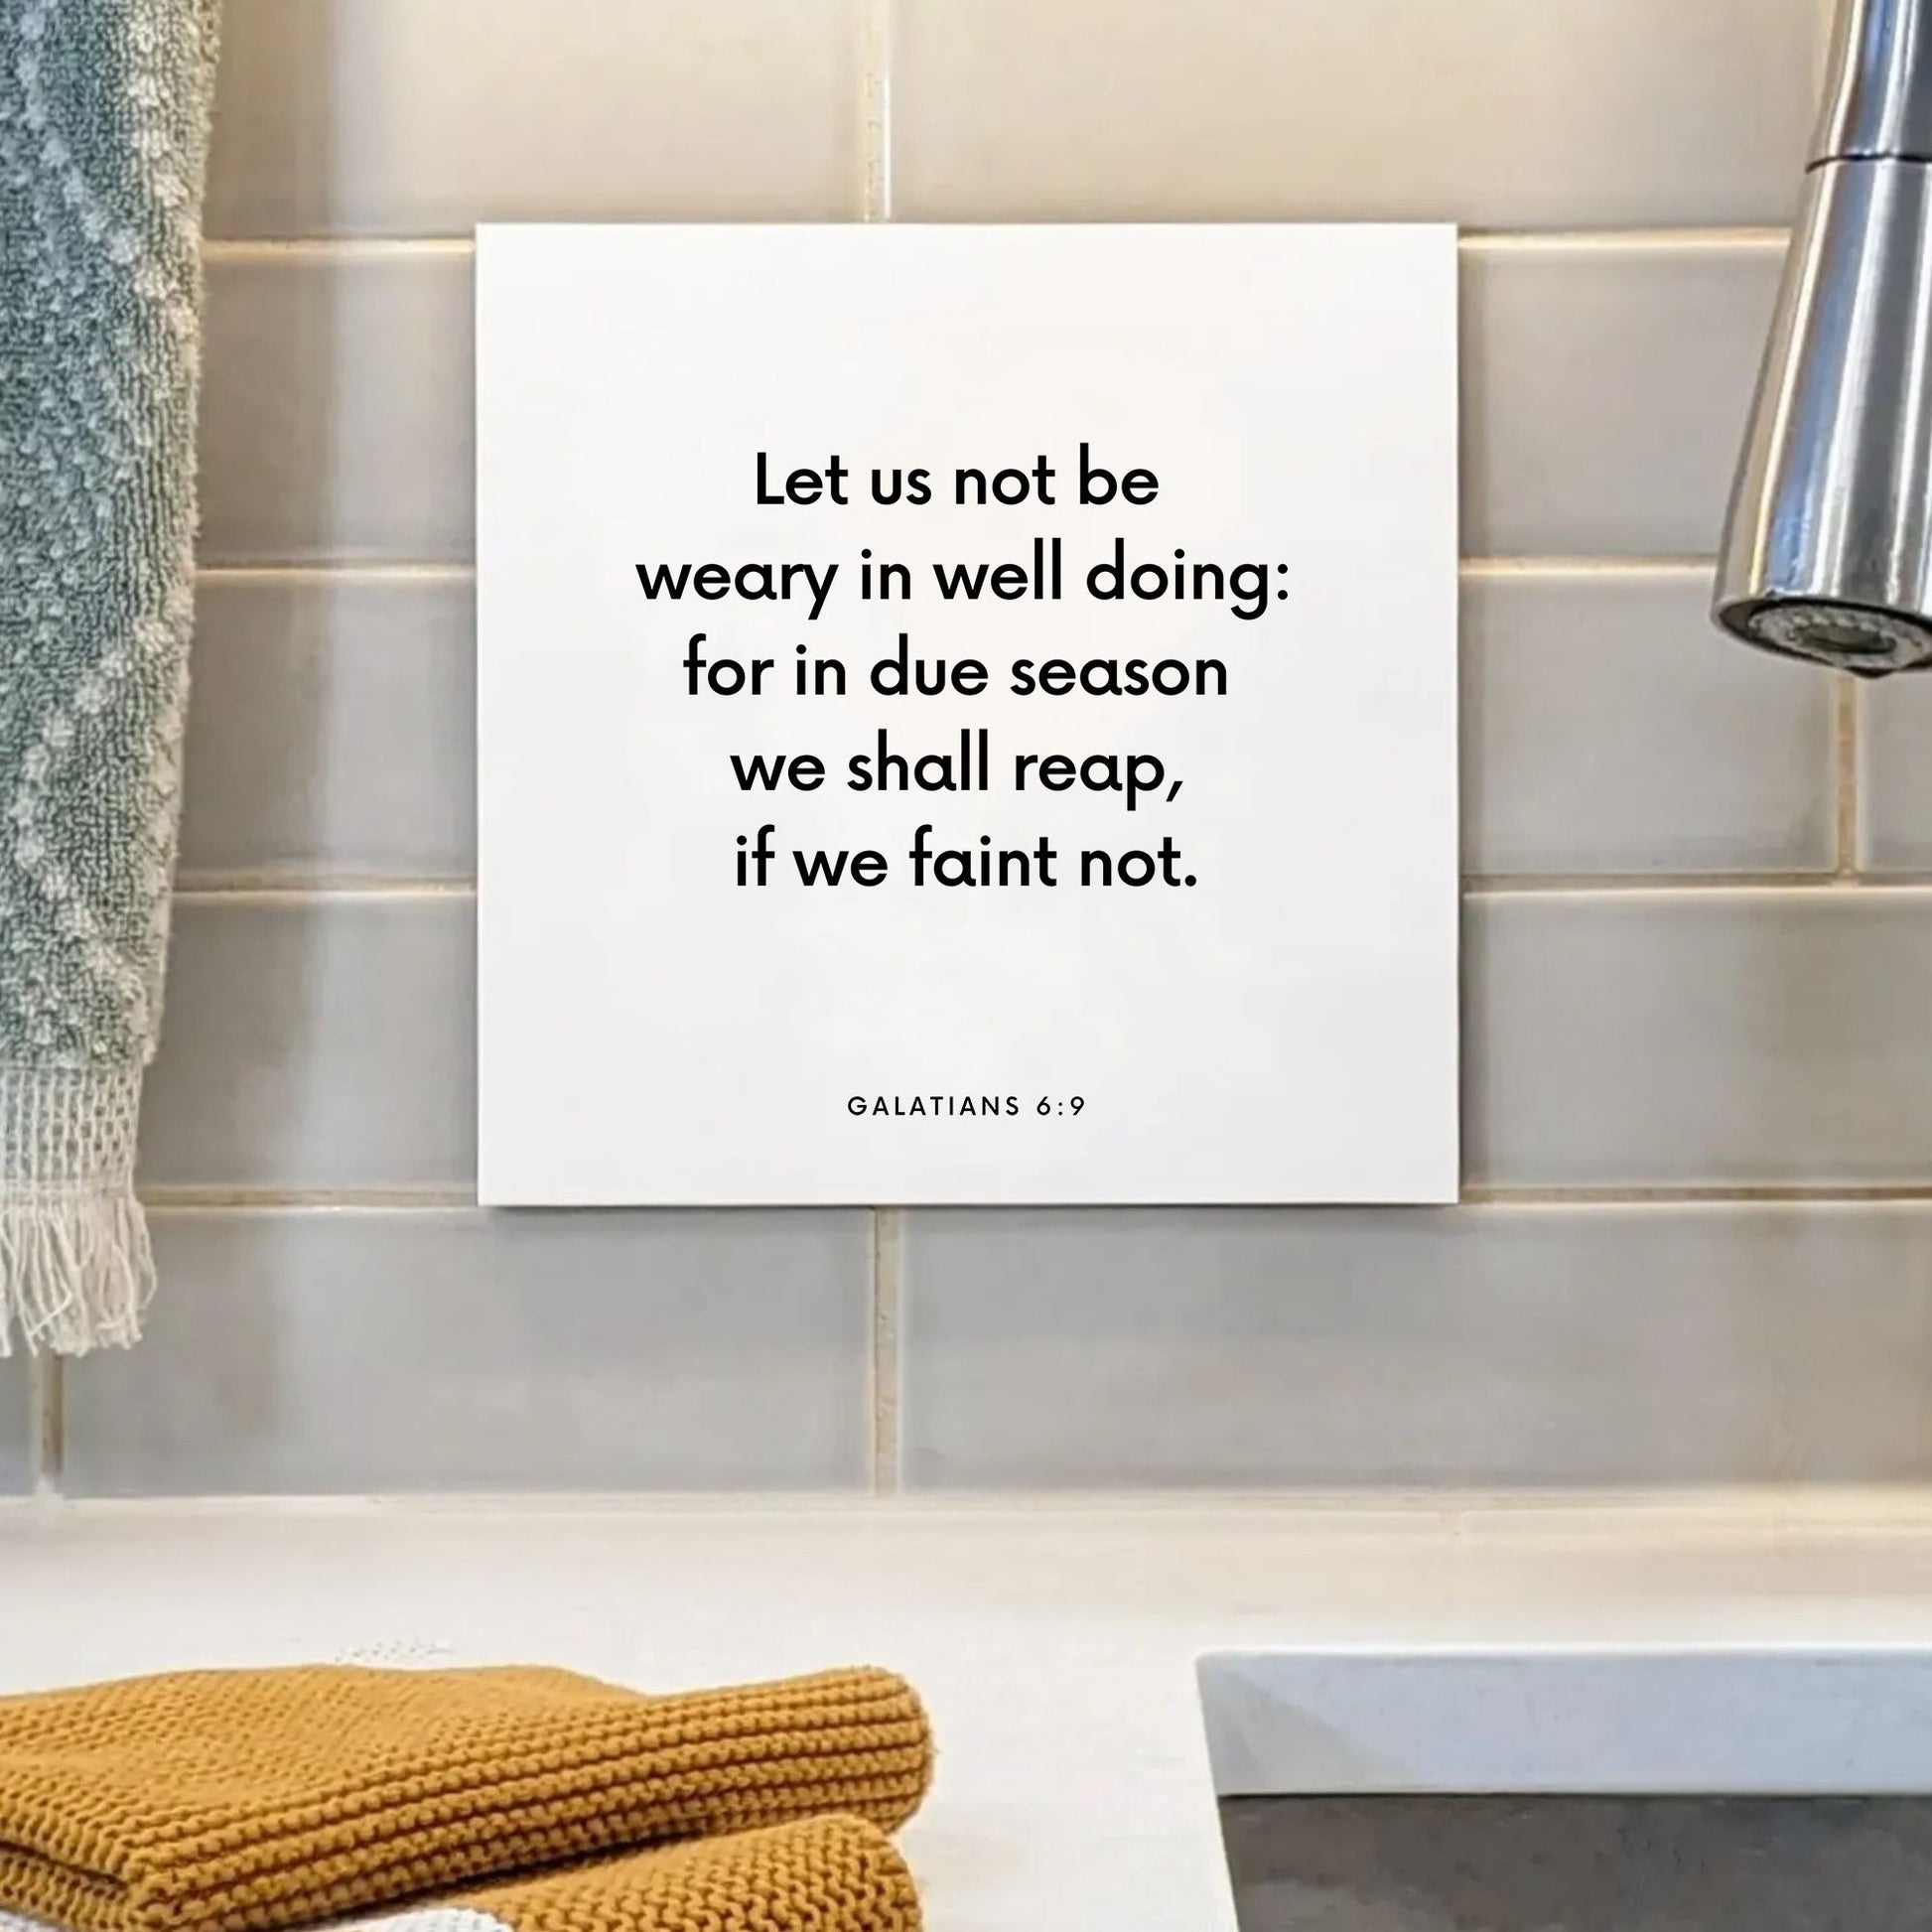 Sink mouting of the scripture tile for Galatians 6:9 - "Let us not be weary in well doing"